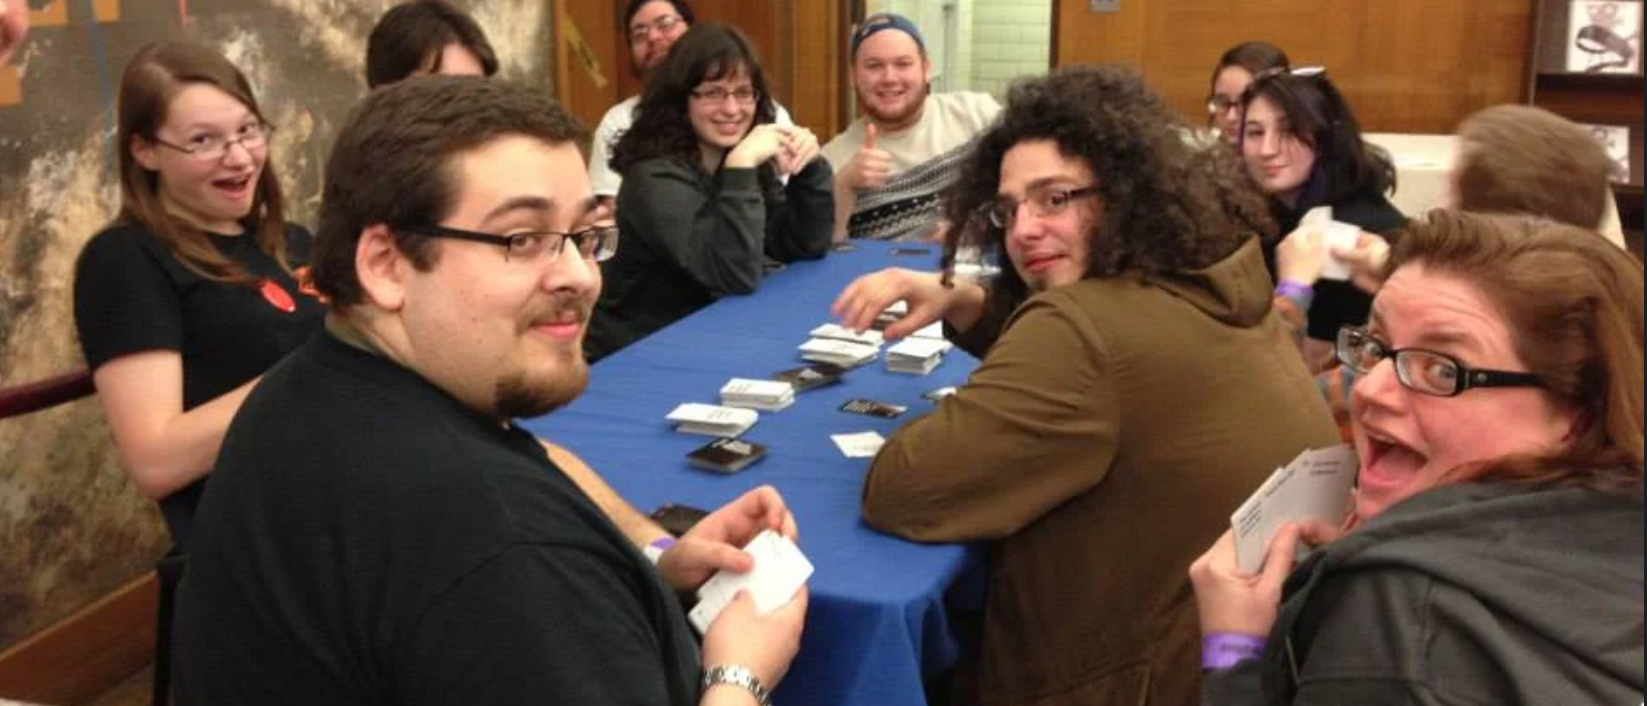 A group of attendees play a card game at the Sci-Fi Film Marathon in 2015.